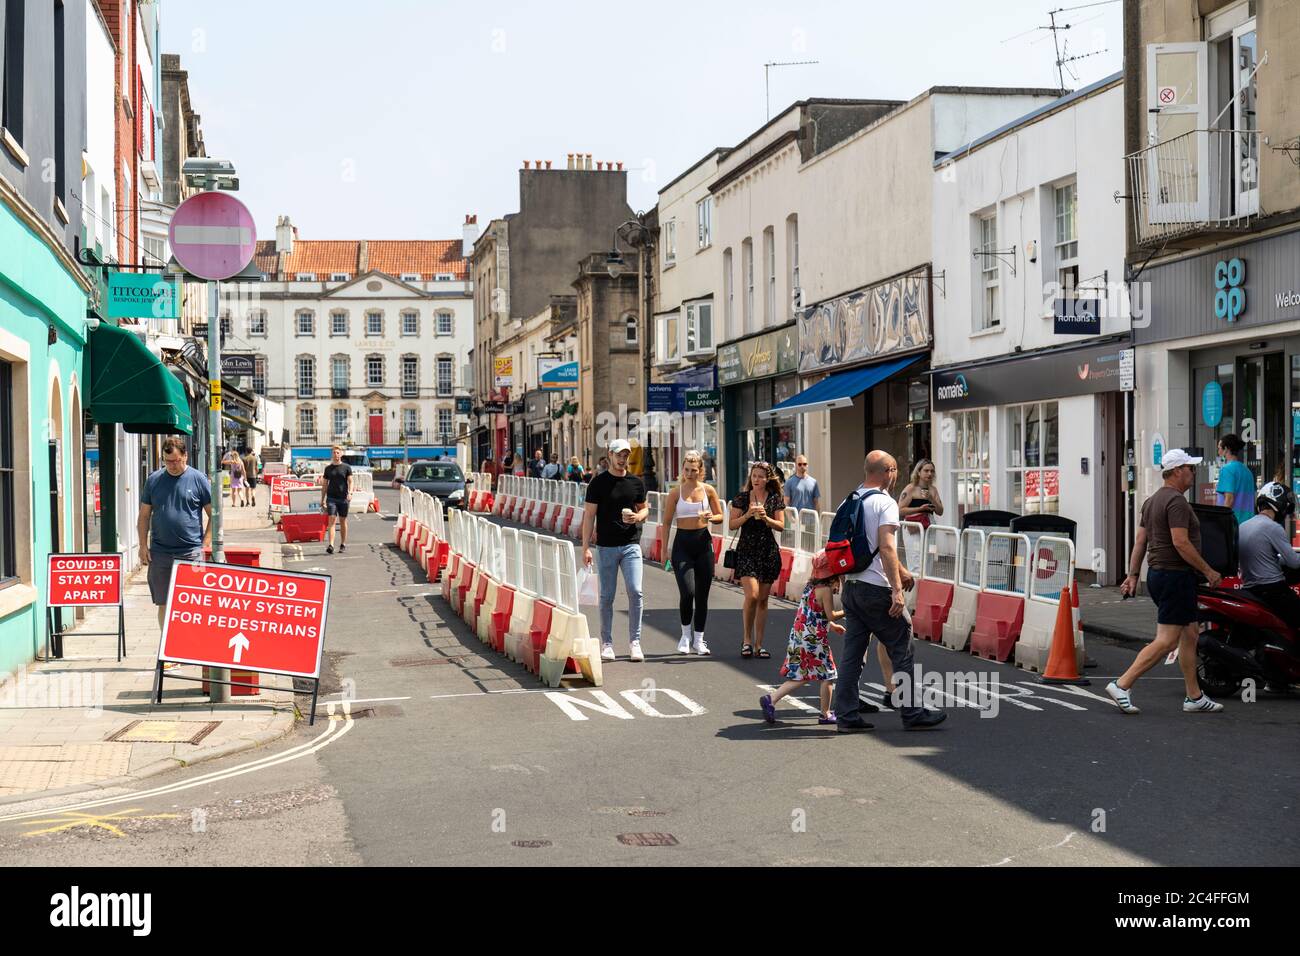 Covid 19 - One way system for pedestrians made by using street barriers to widen the pavements in Clifton Village for social distancing, Bristol, UK Stock Photo